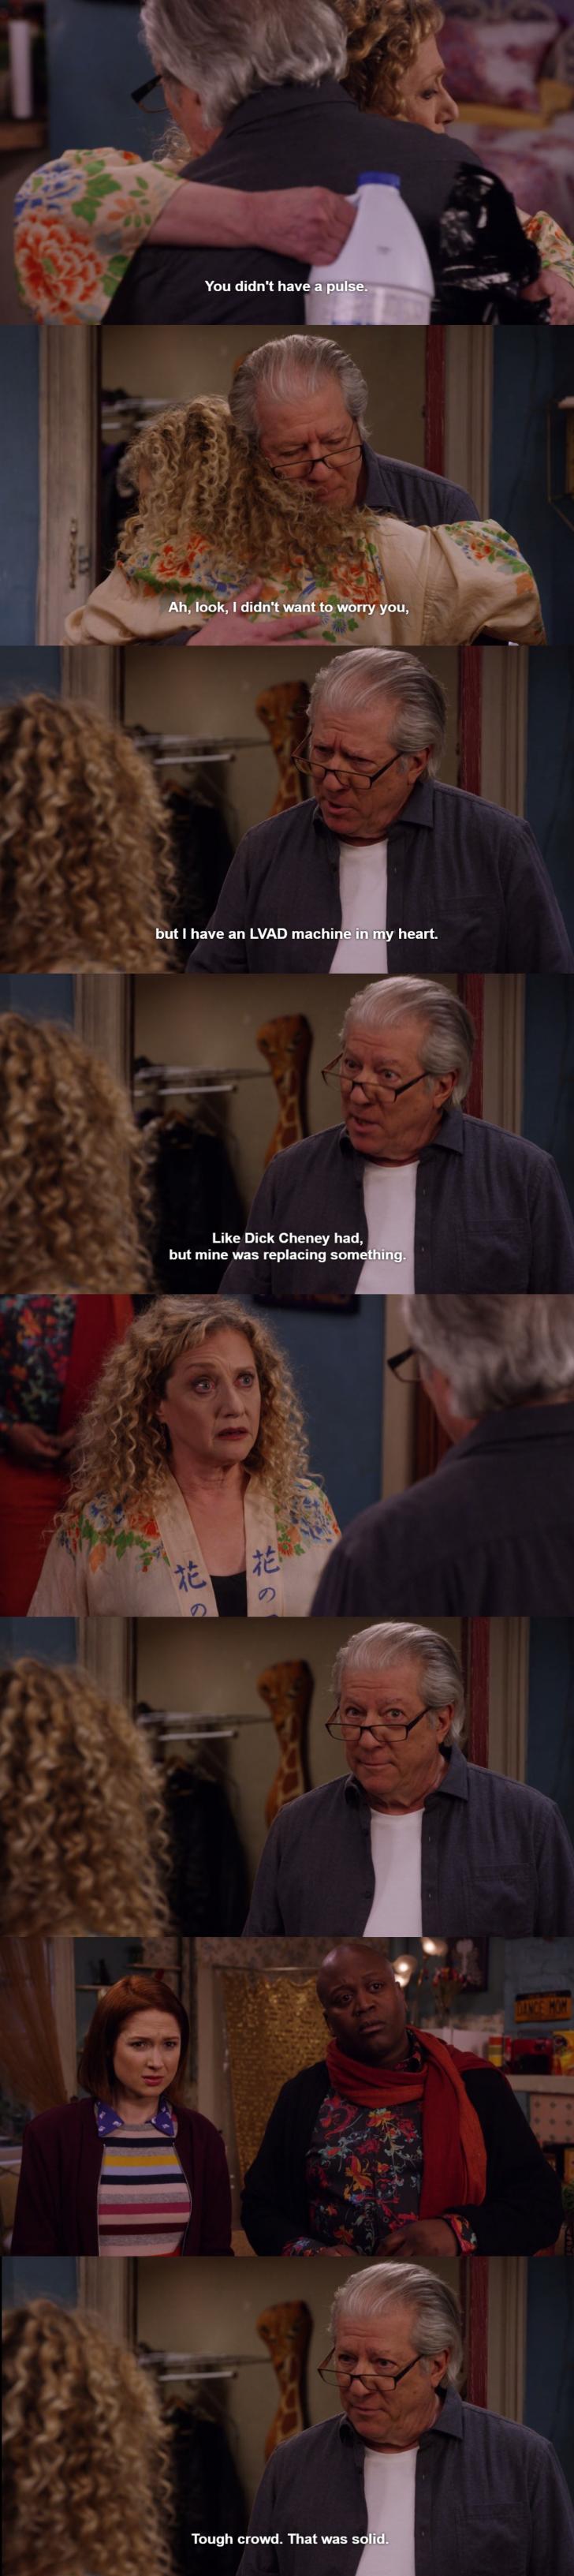 Unbreakable Kimmy Schmidt  dishes it out.